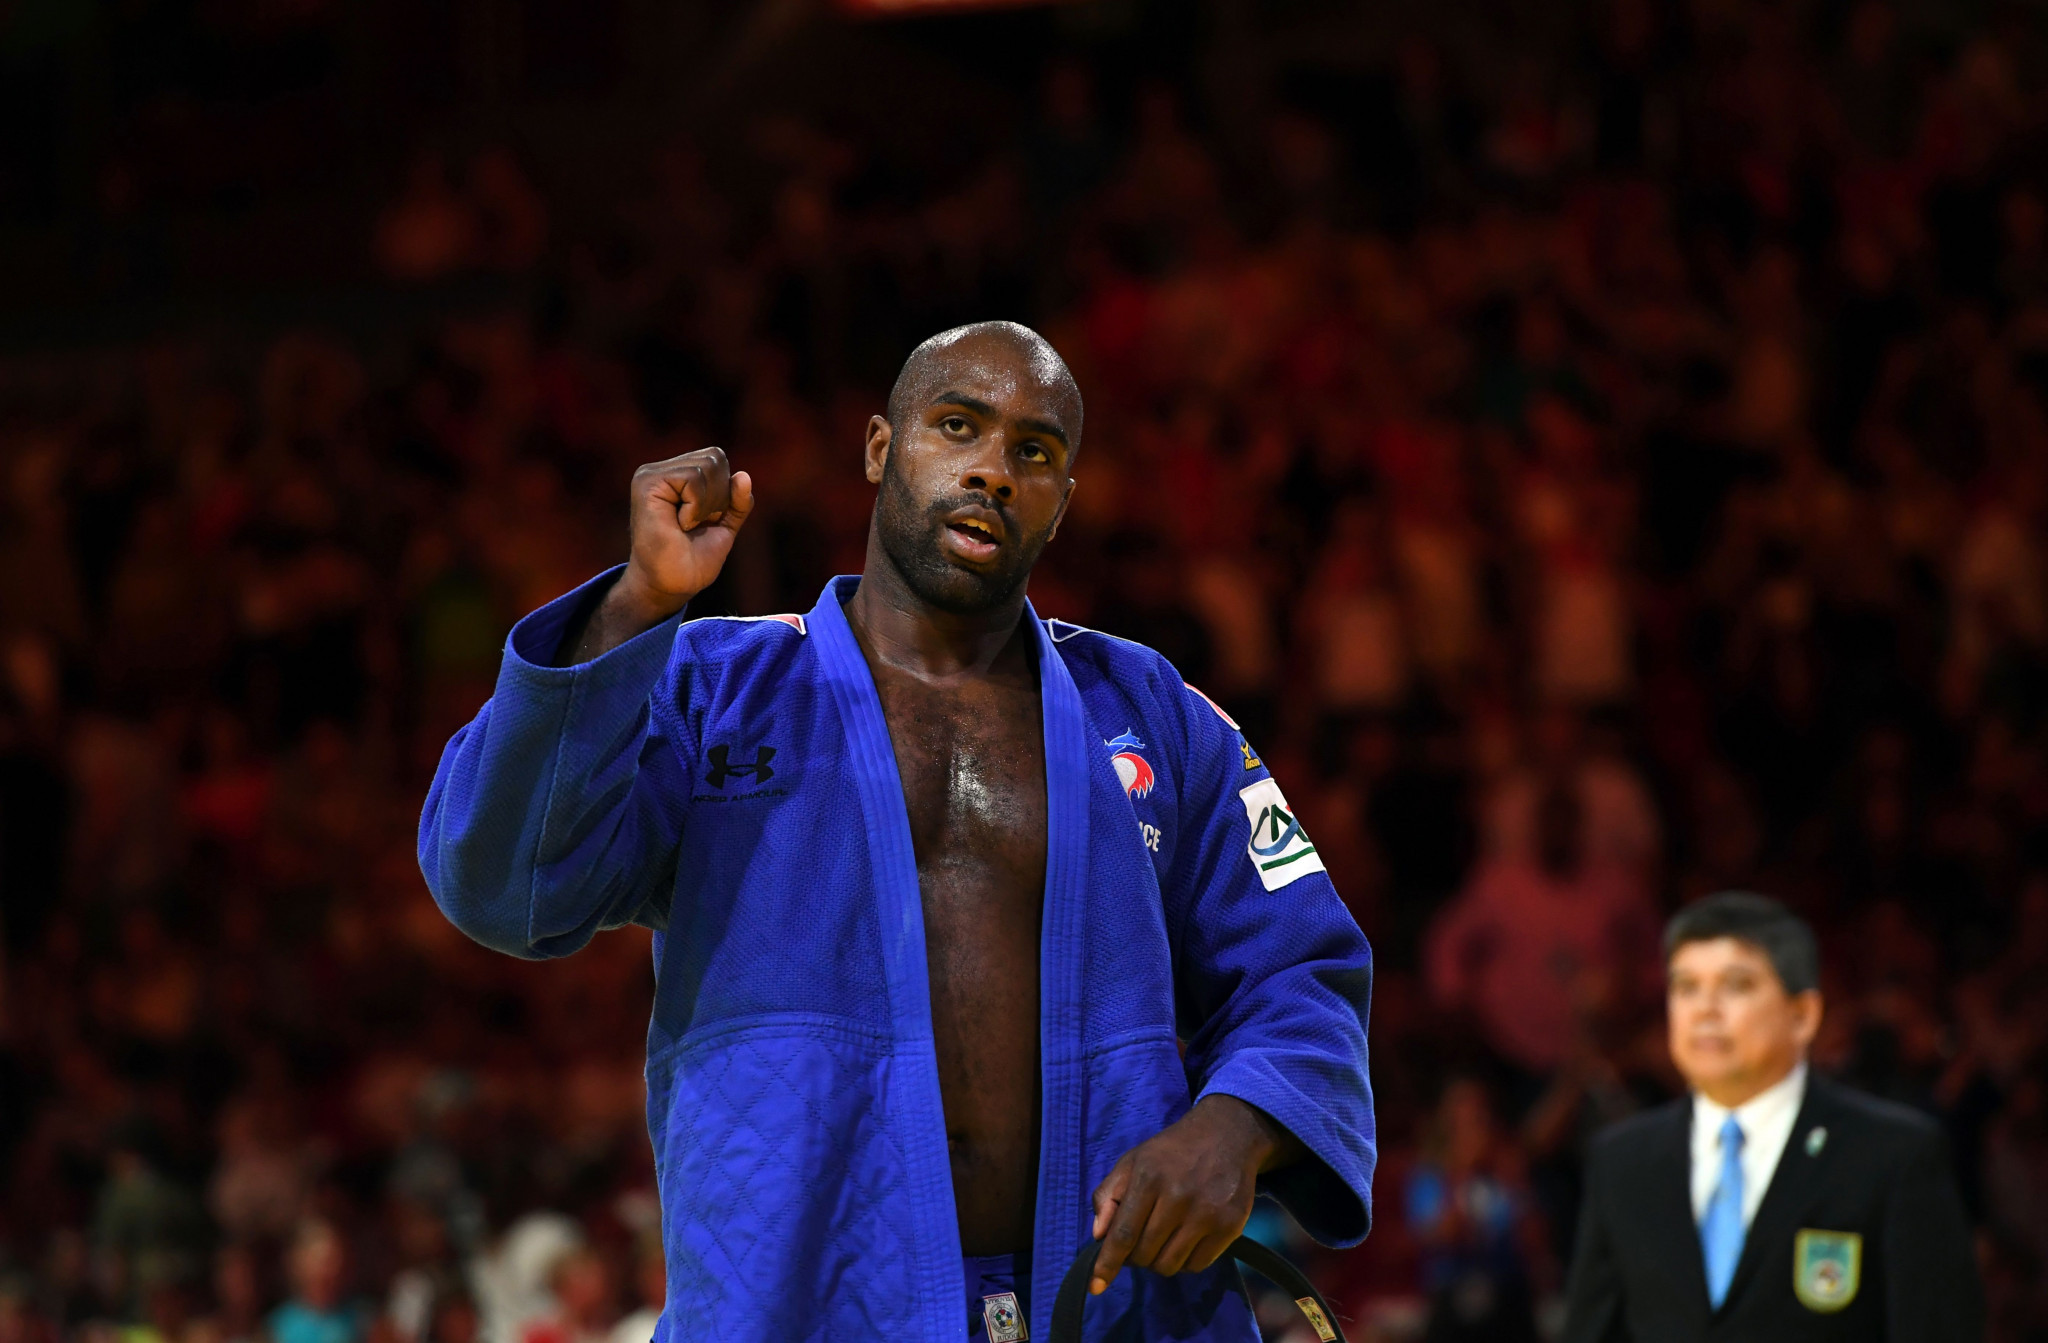 Riner continues winning streak as IJF Grand Prix in Zagreb concludes